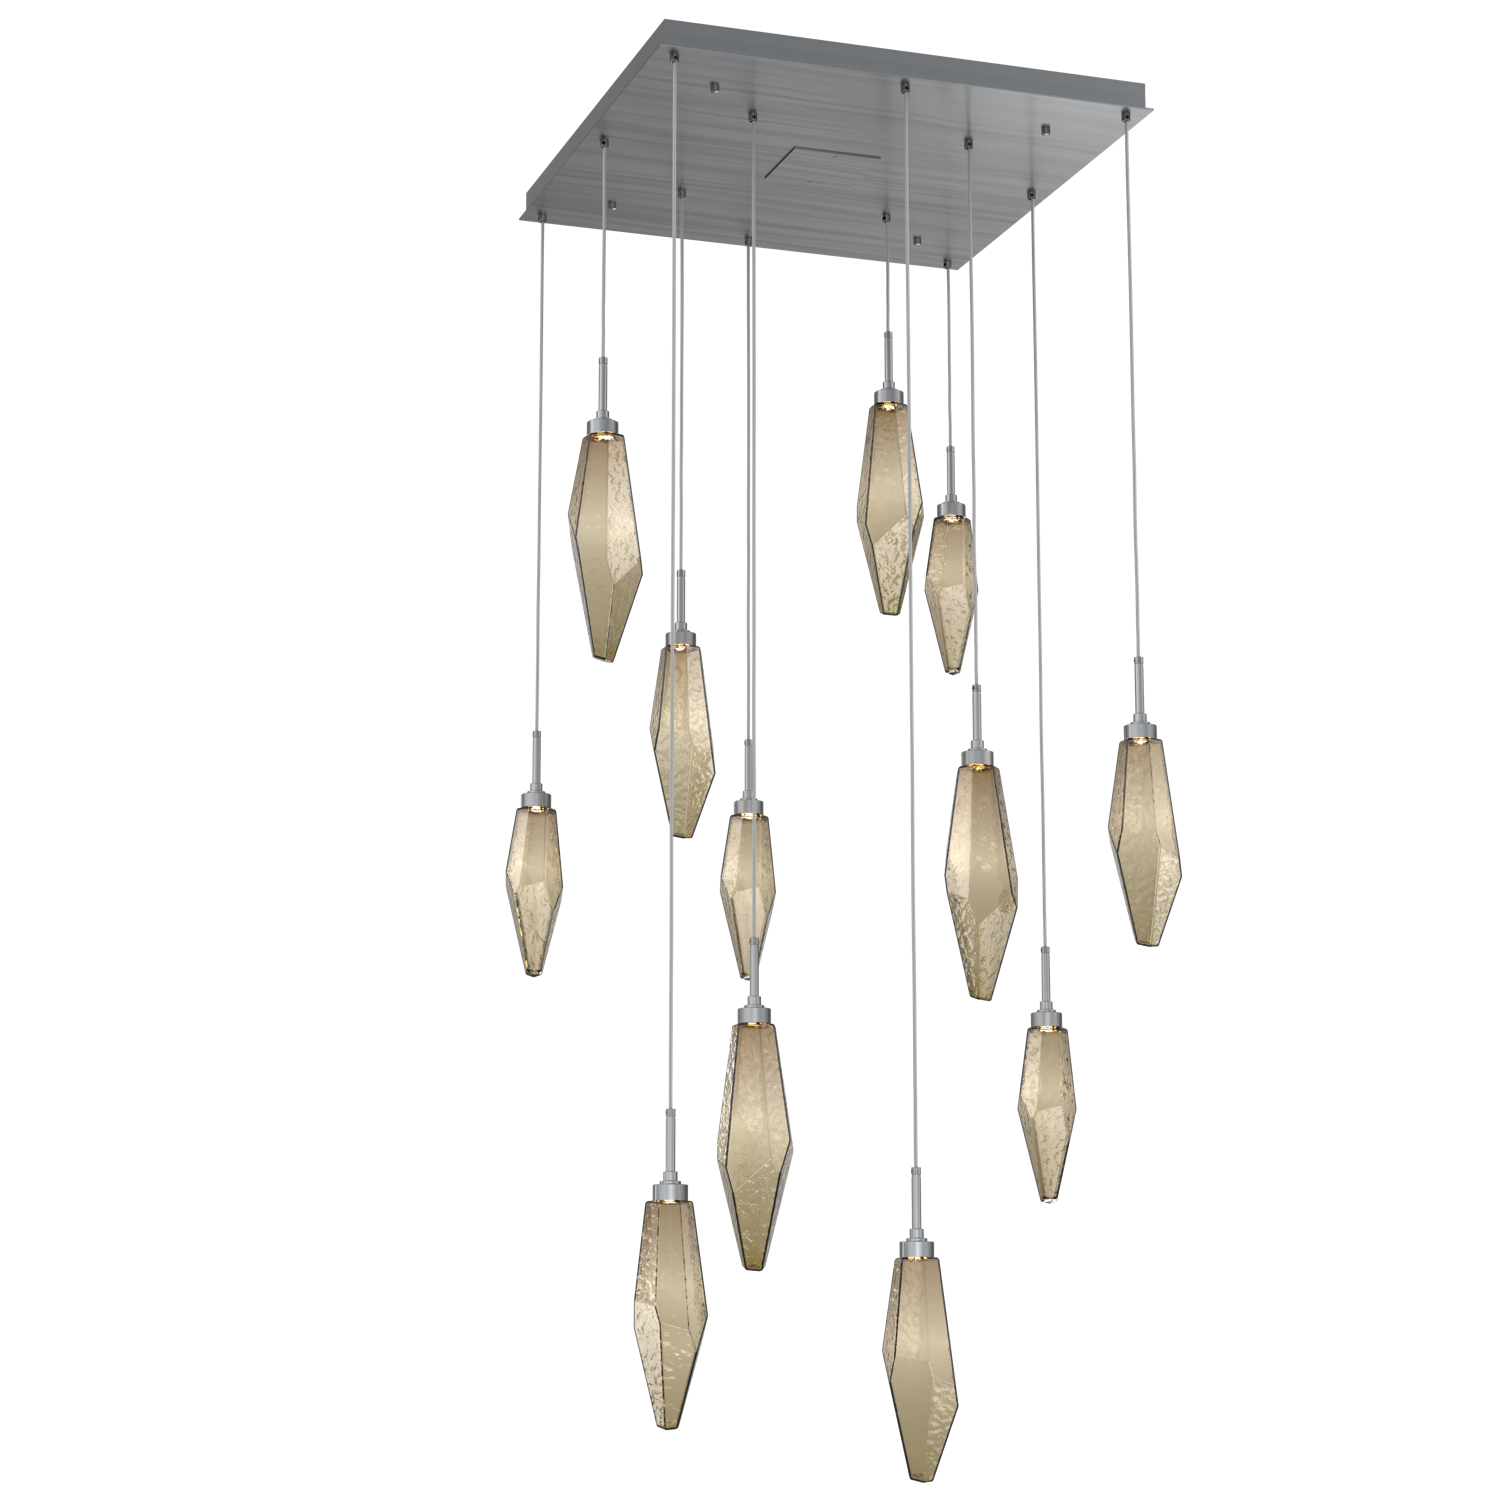 CHB0050-12-GM-CB-Hammerton-Studio-Rock-Crystal-12-light-square-pendant-chandelier-with-gunmetal-finish-and-chilled-bronze-blown-glass-shades-and-LED-lamping